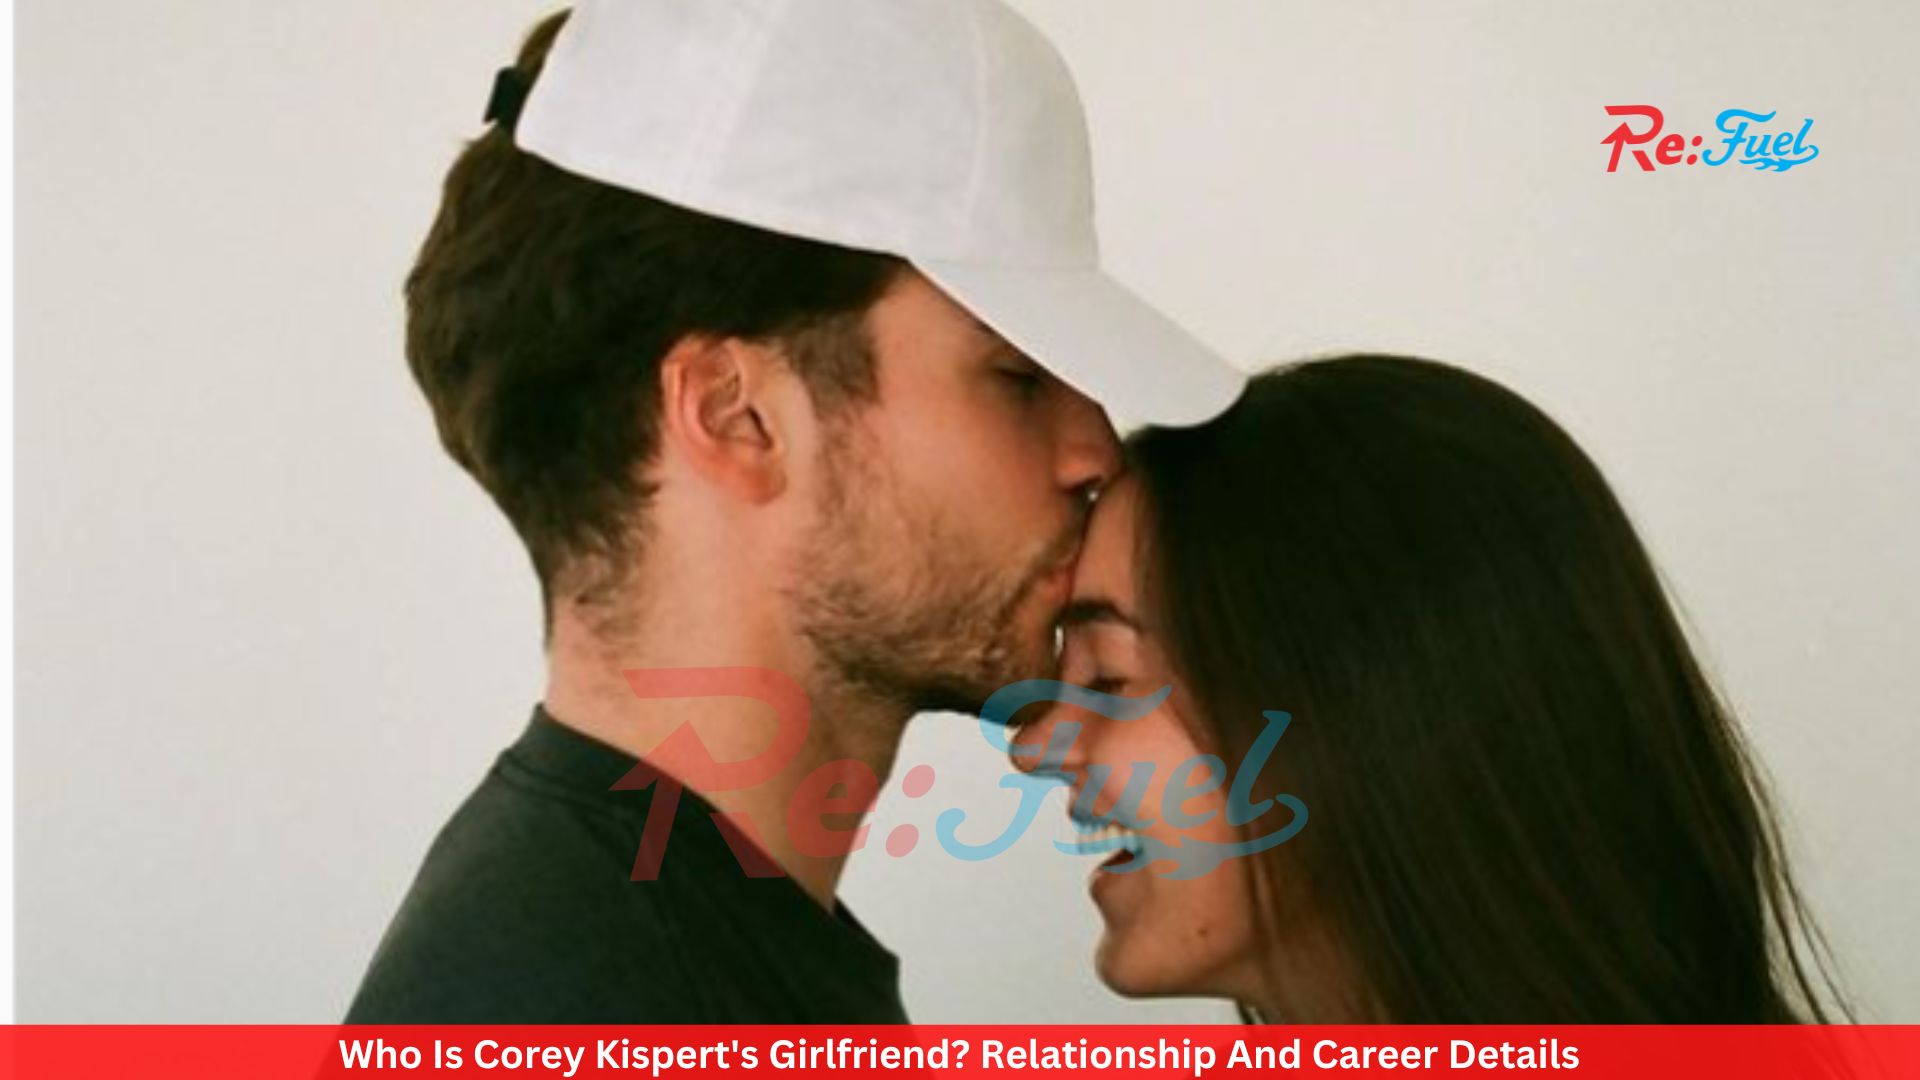 Who Is Corey Kispert's Girlfriend? Relationship And Career Details